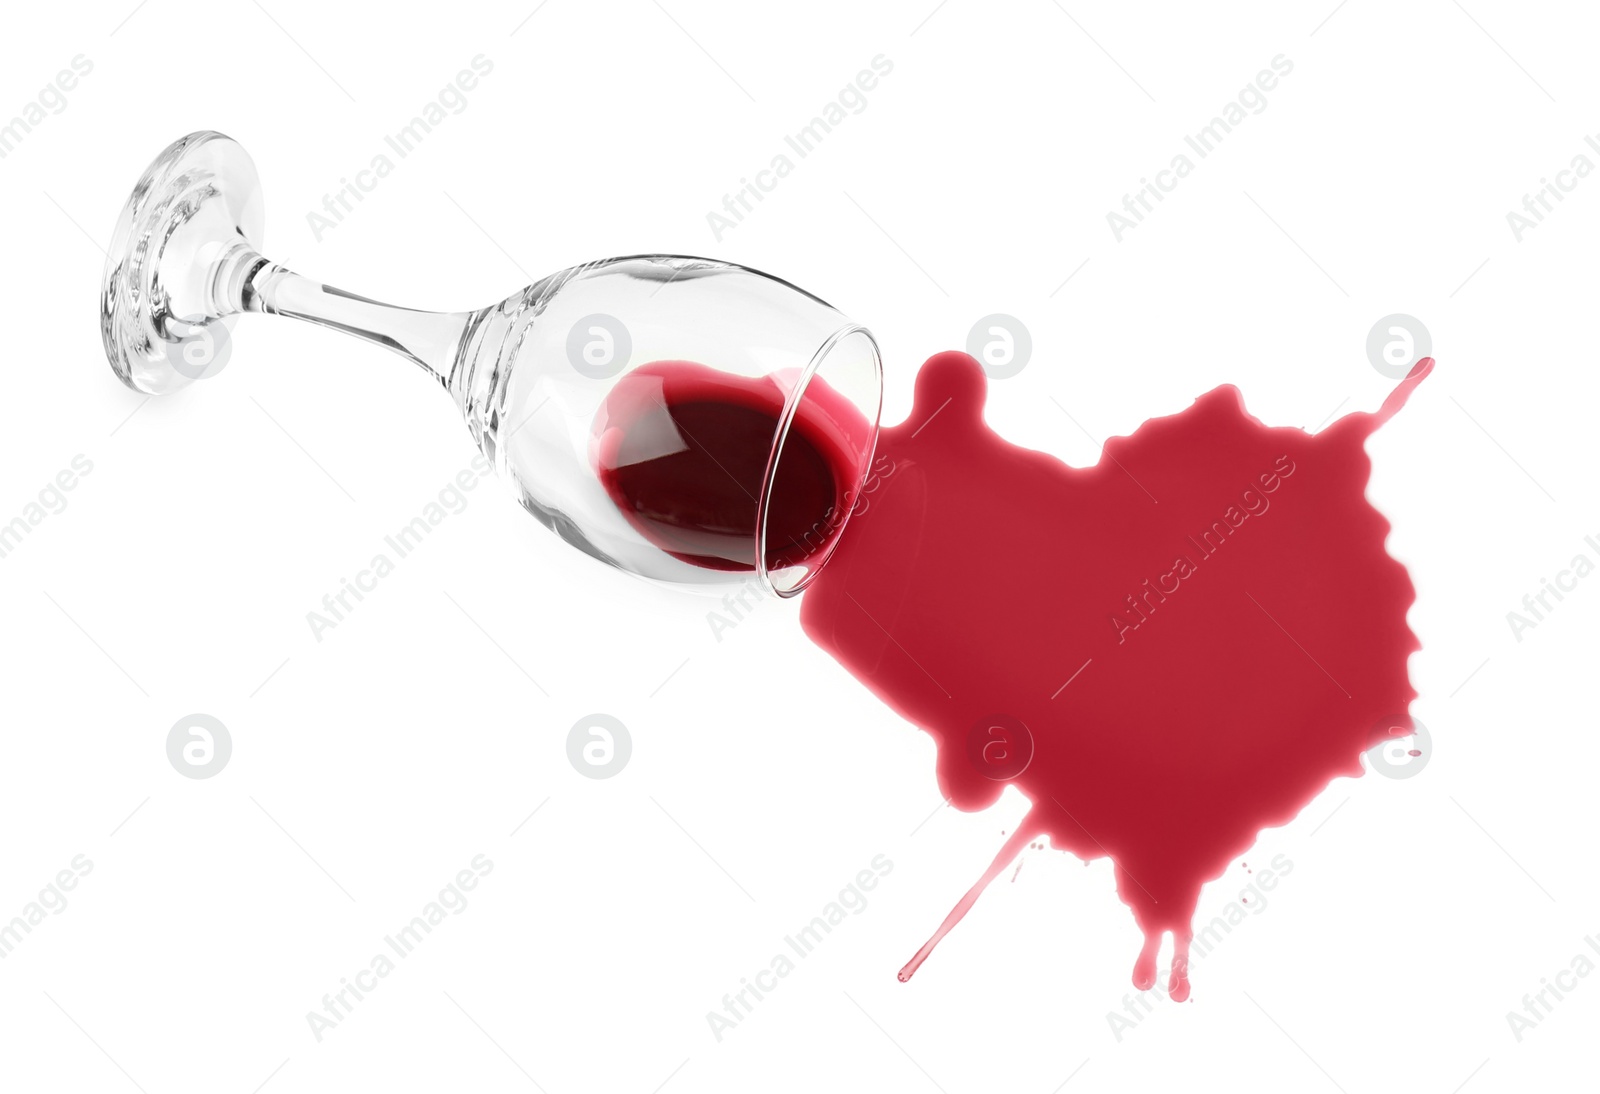 Photo of Overturned glass and spilled wine on white background, top view